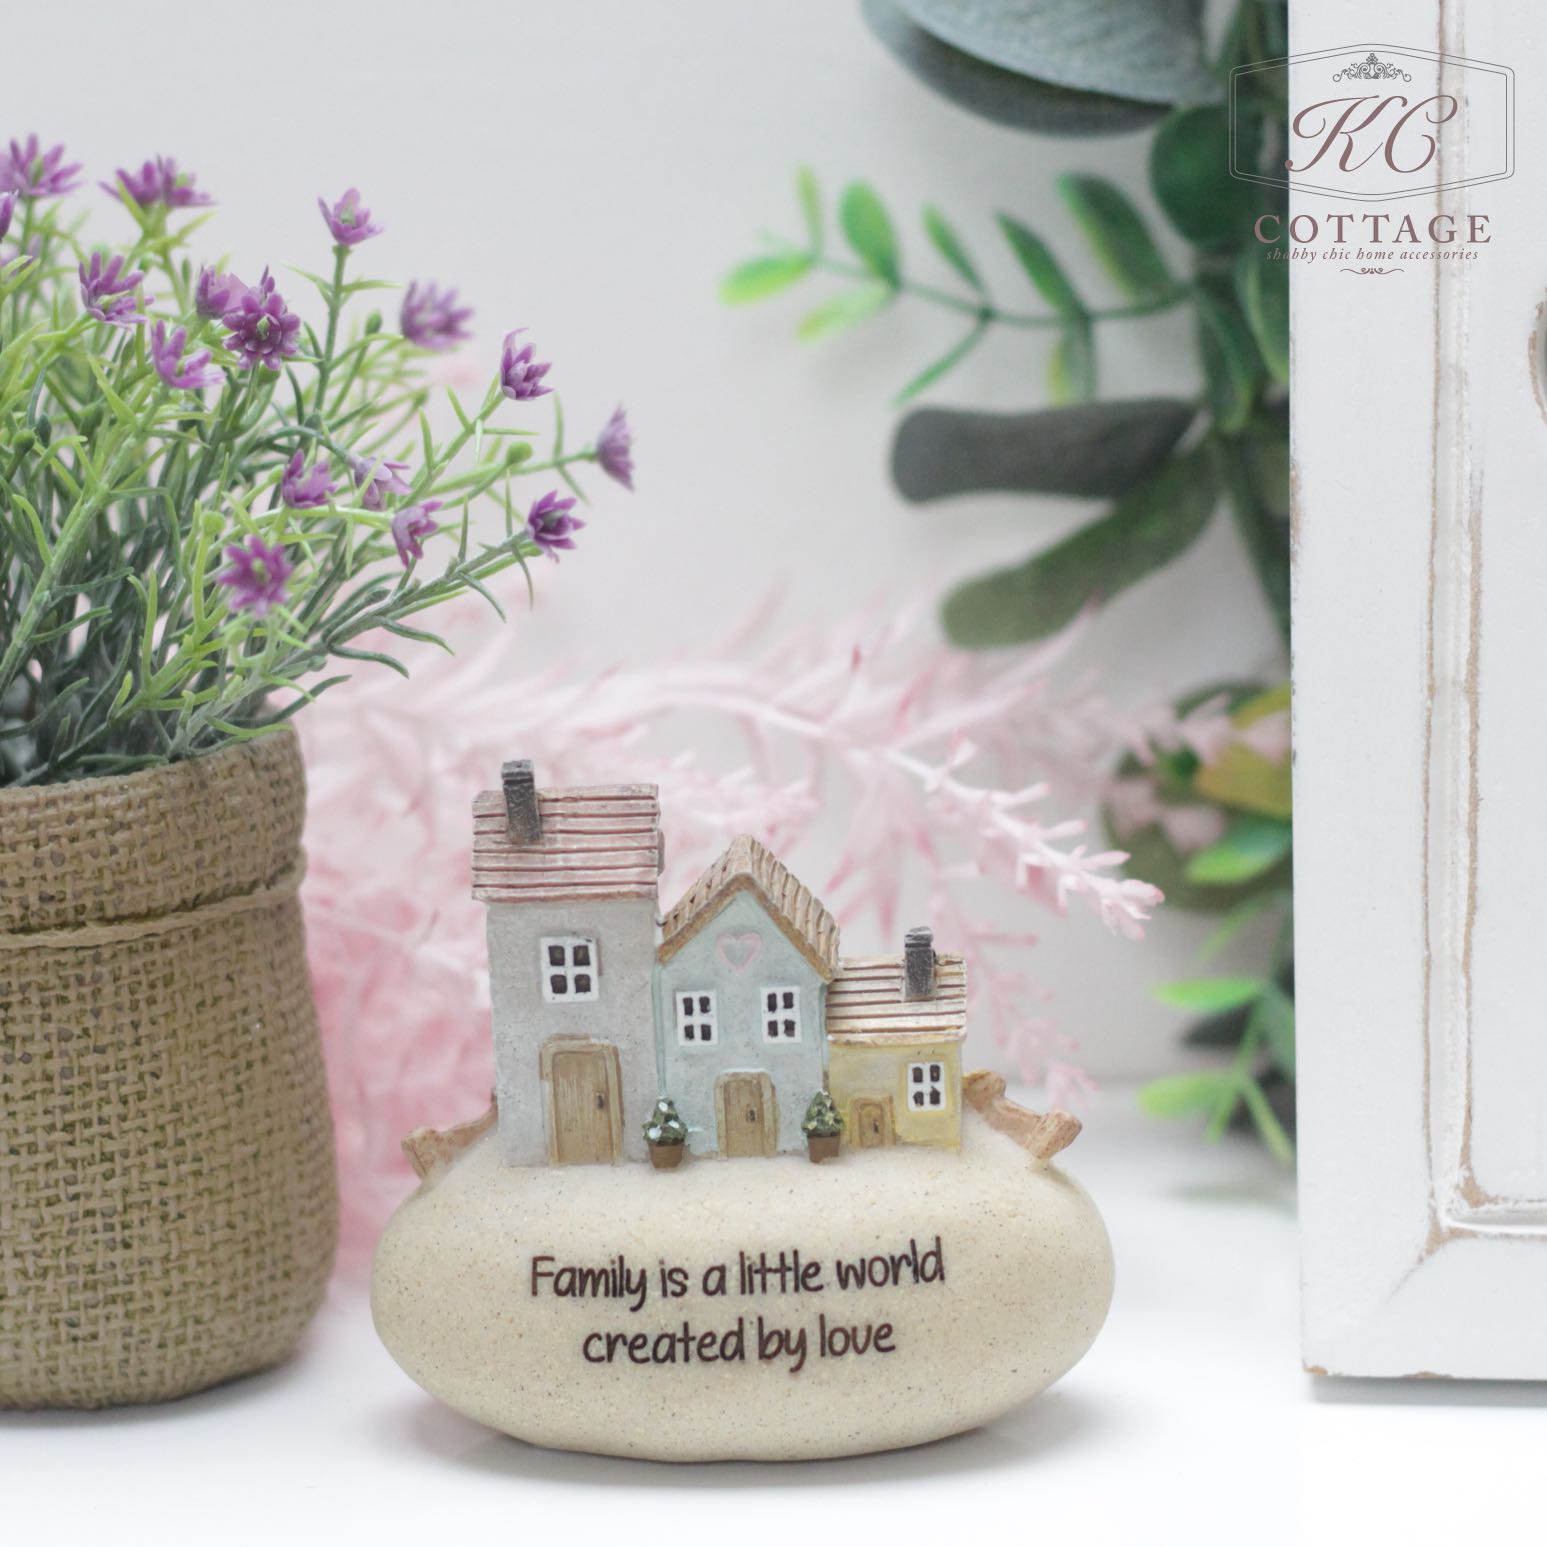 Pebble Lane Cottage - Family is a little world created by love